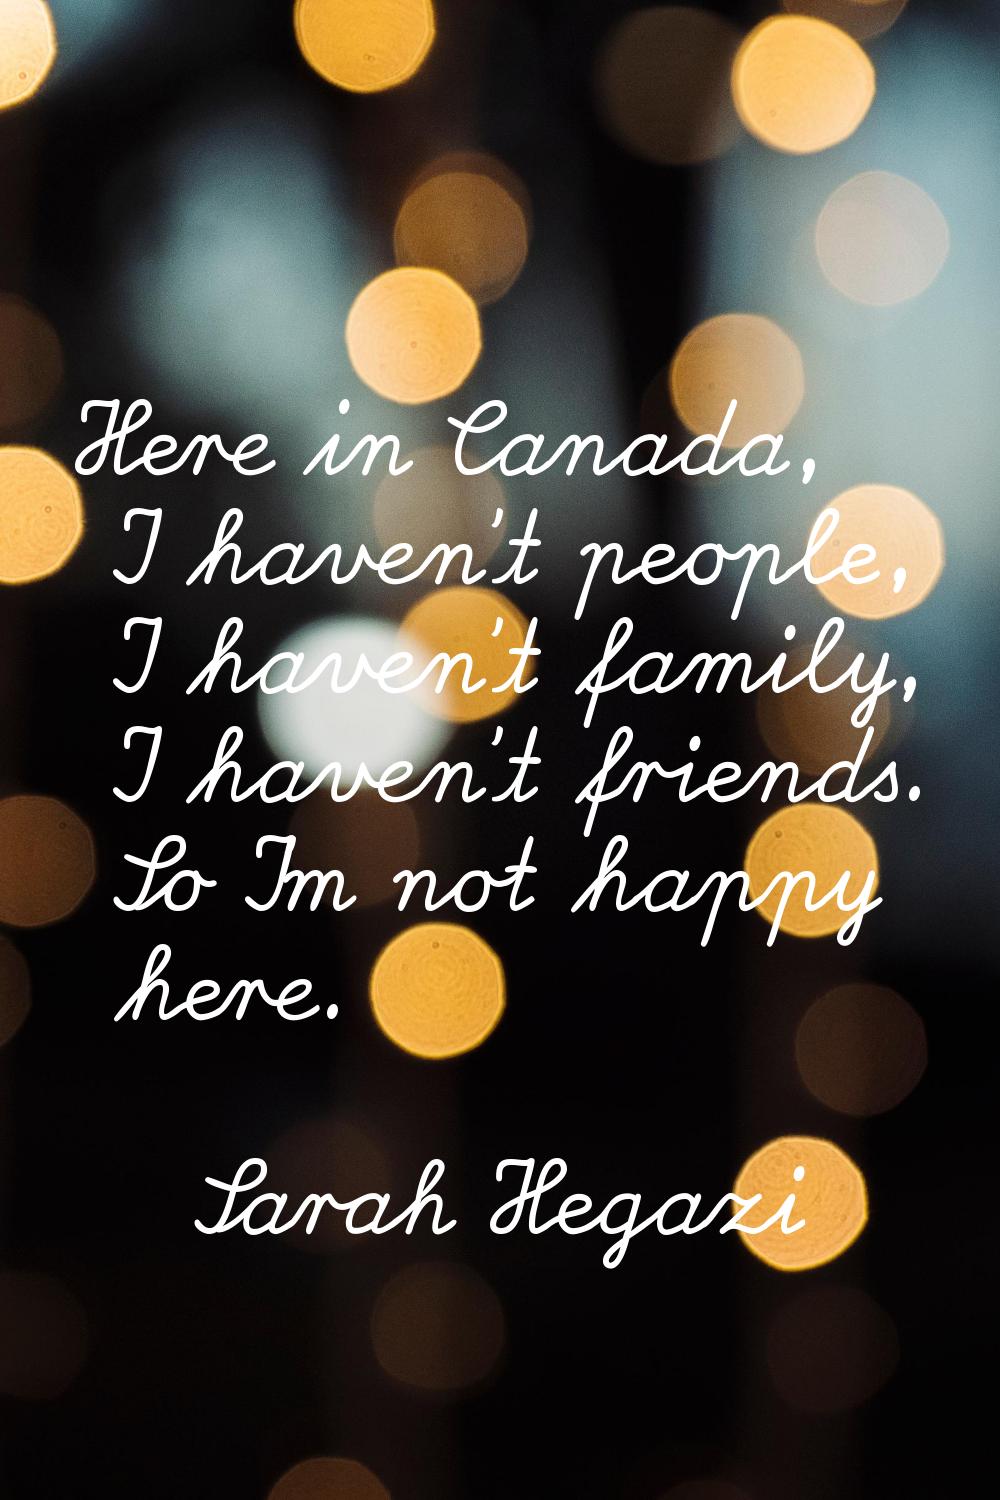 Here in Canada, I haven't people, I haven't family, I haven't friends. So I'm not happy here.